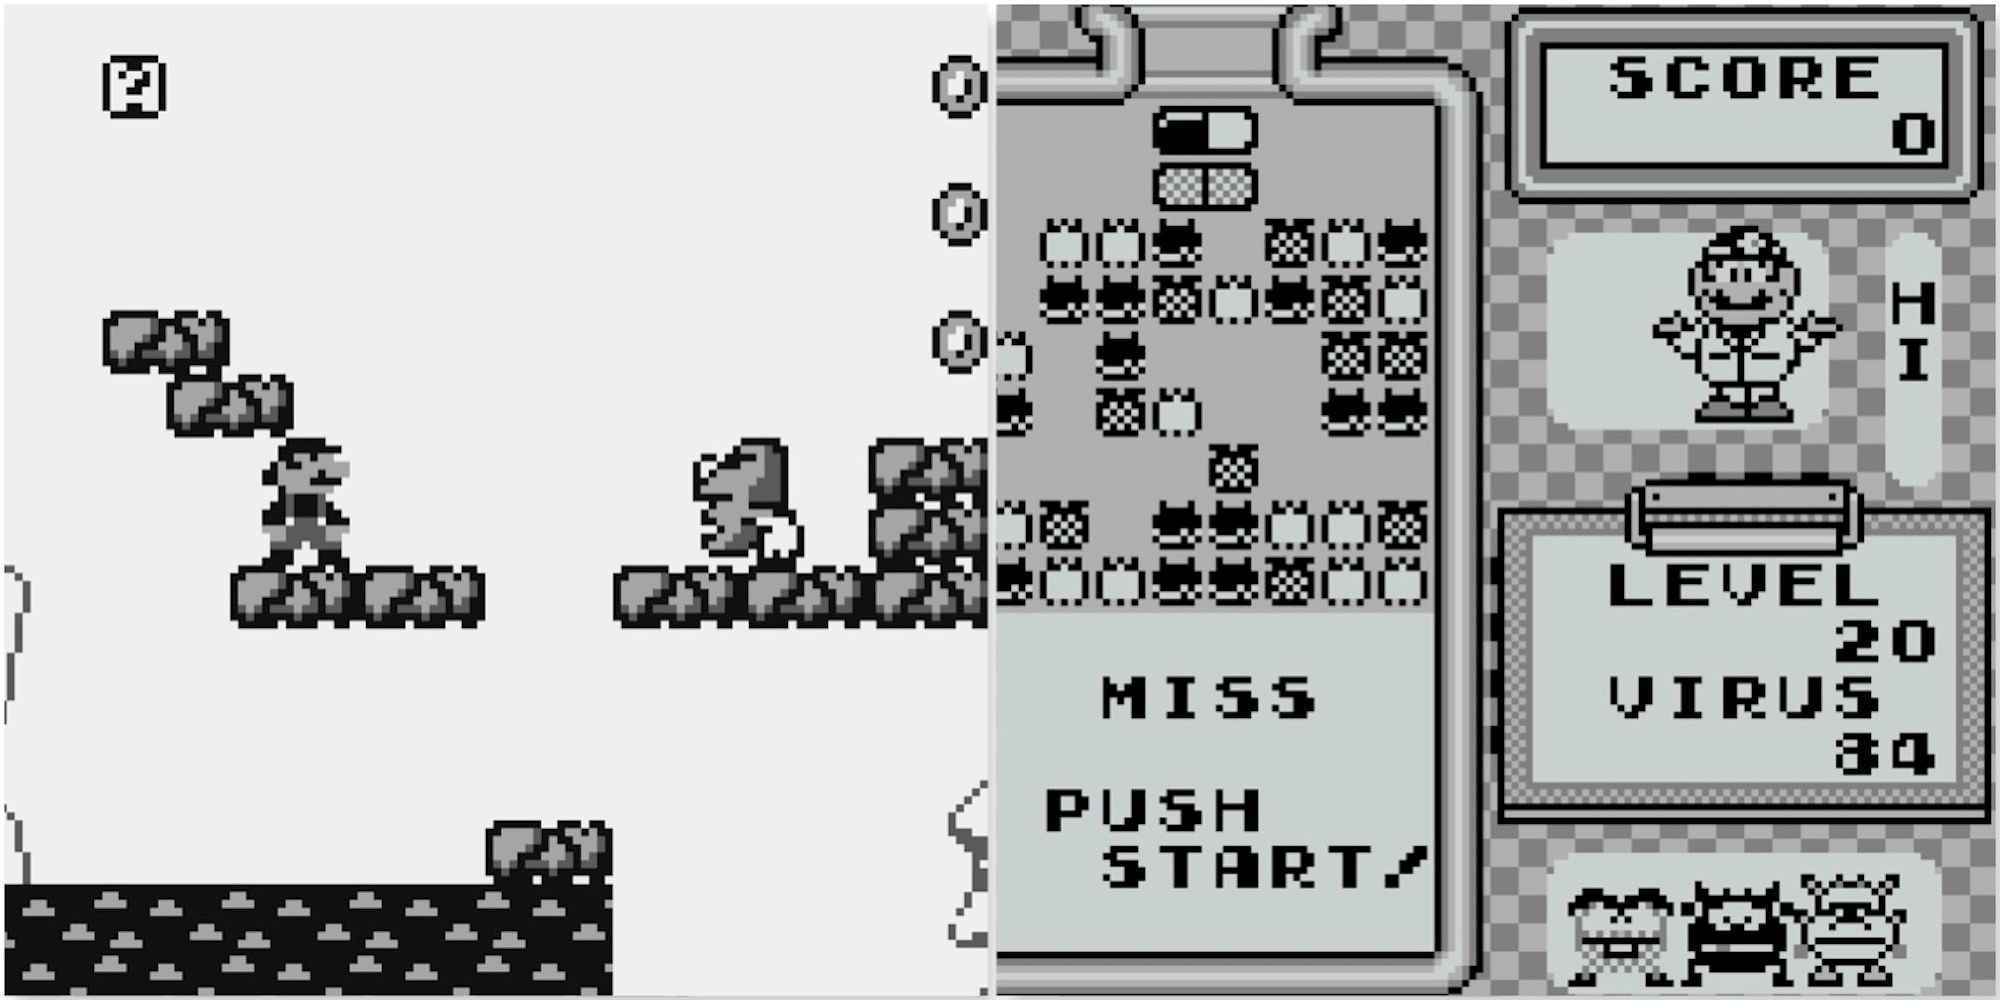 Playing levels in Super Mario Land and Dr. Mario